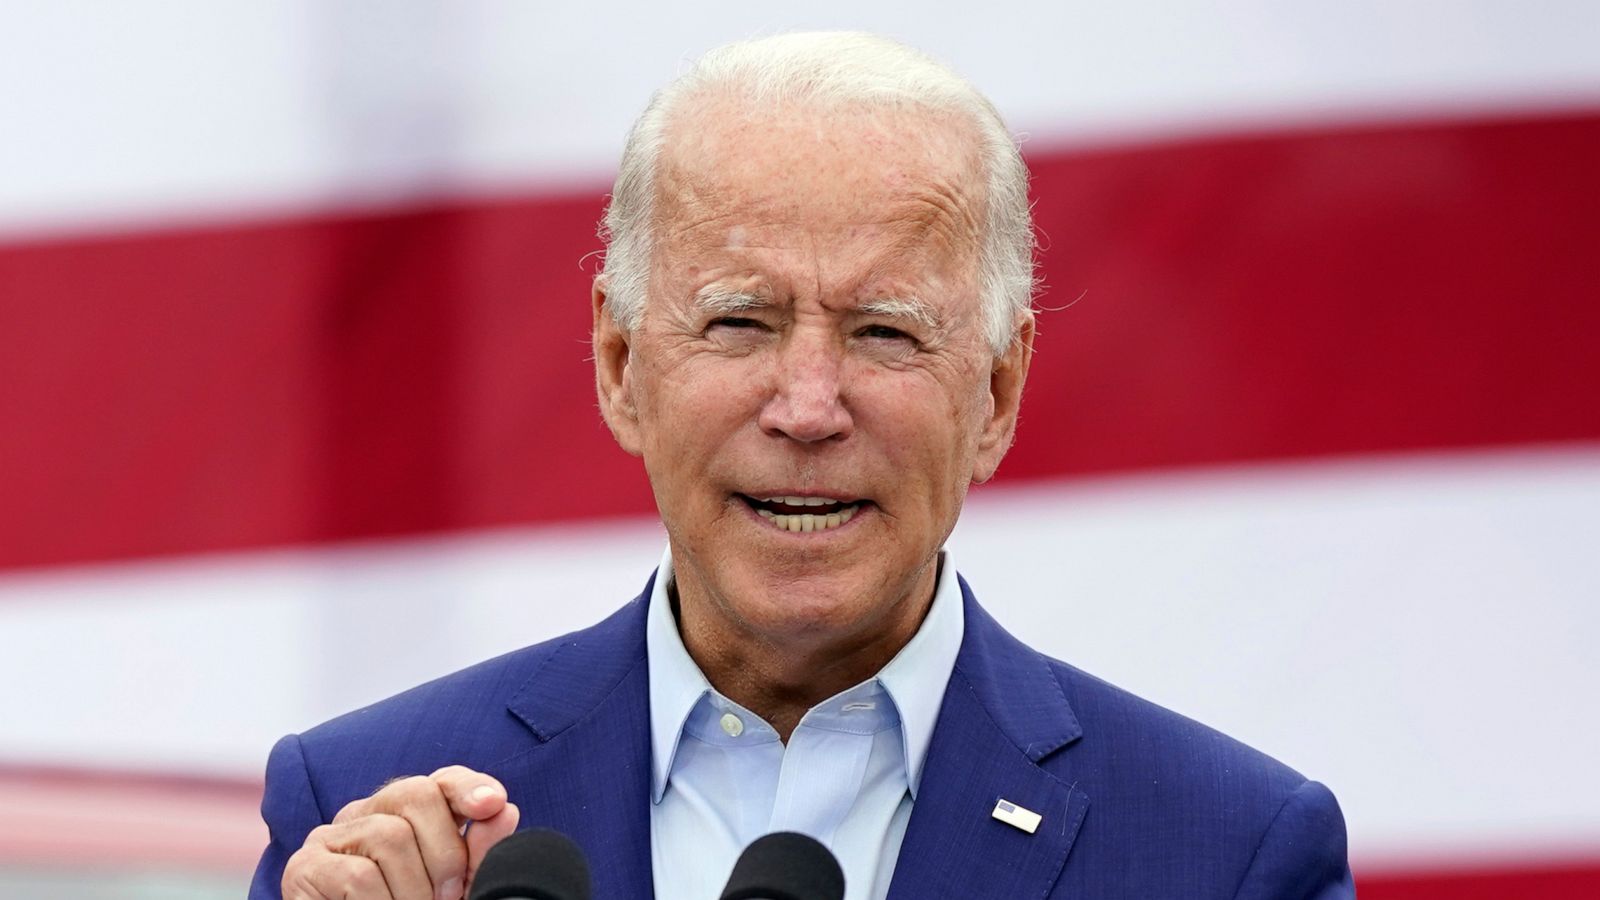 Joe Biden: What you need to know about the 46th president